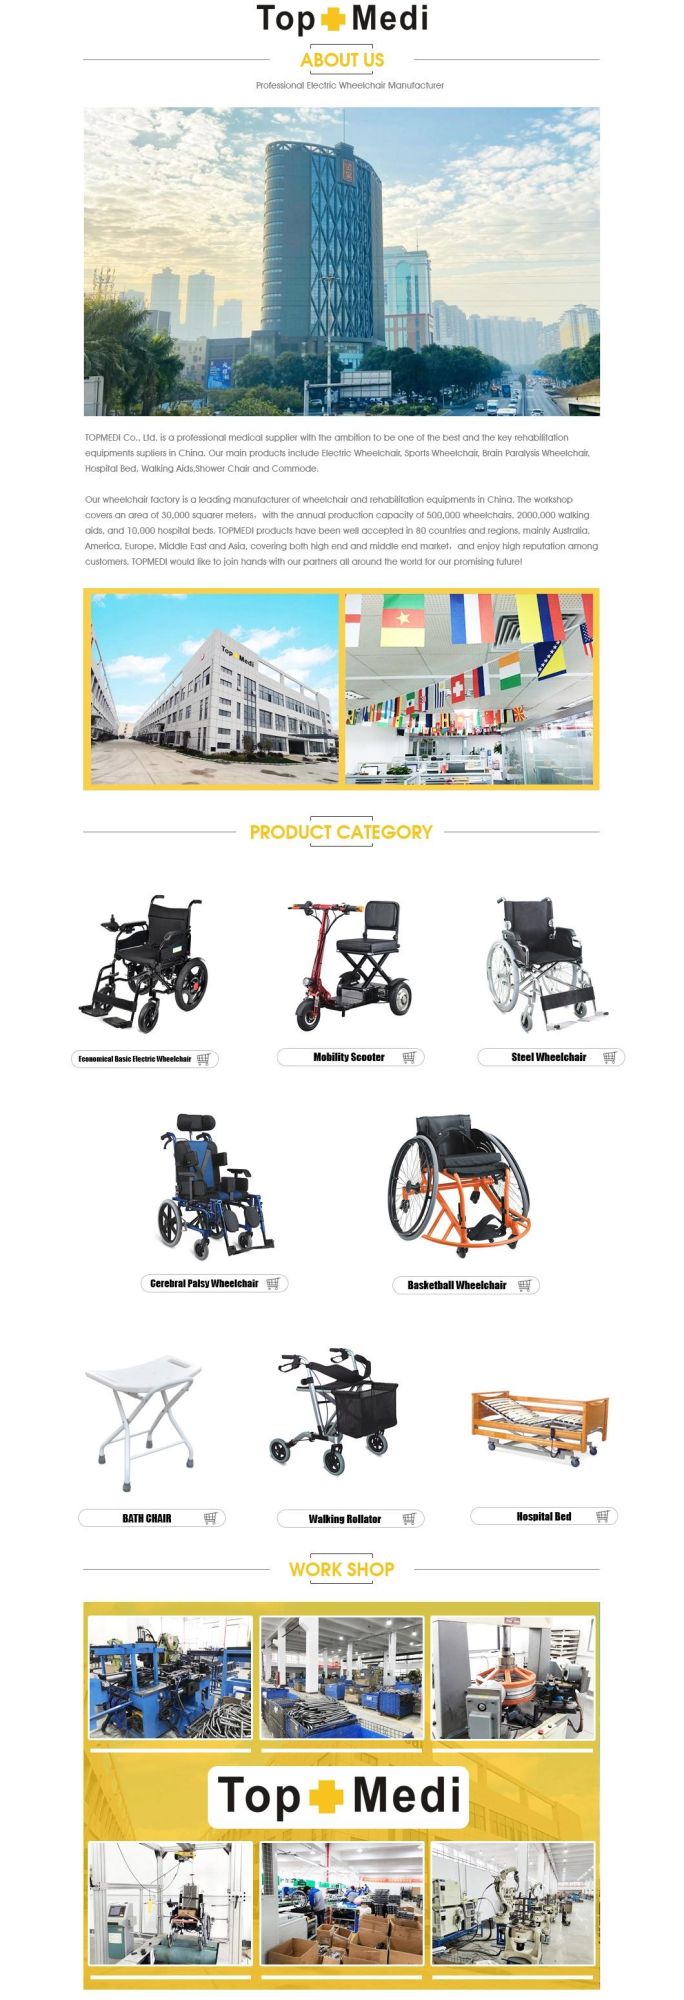 Multifunction Patient Transfer Lift Electric Commode Wheelchair